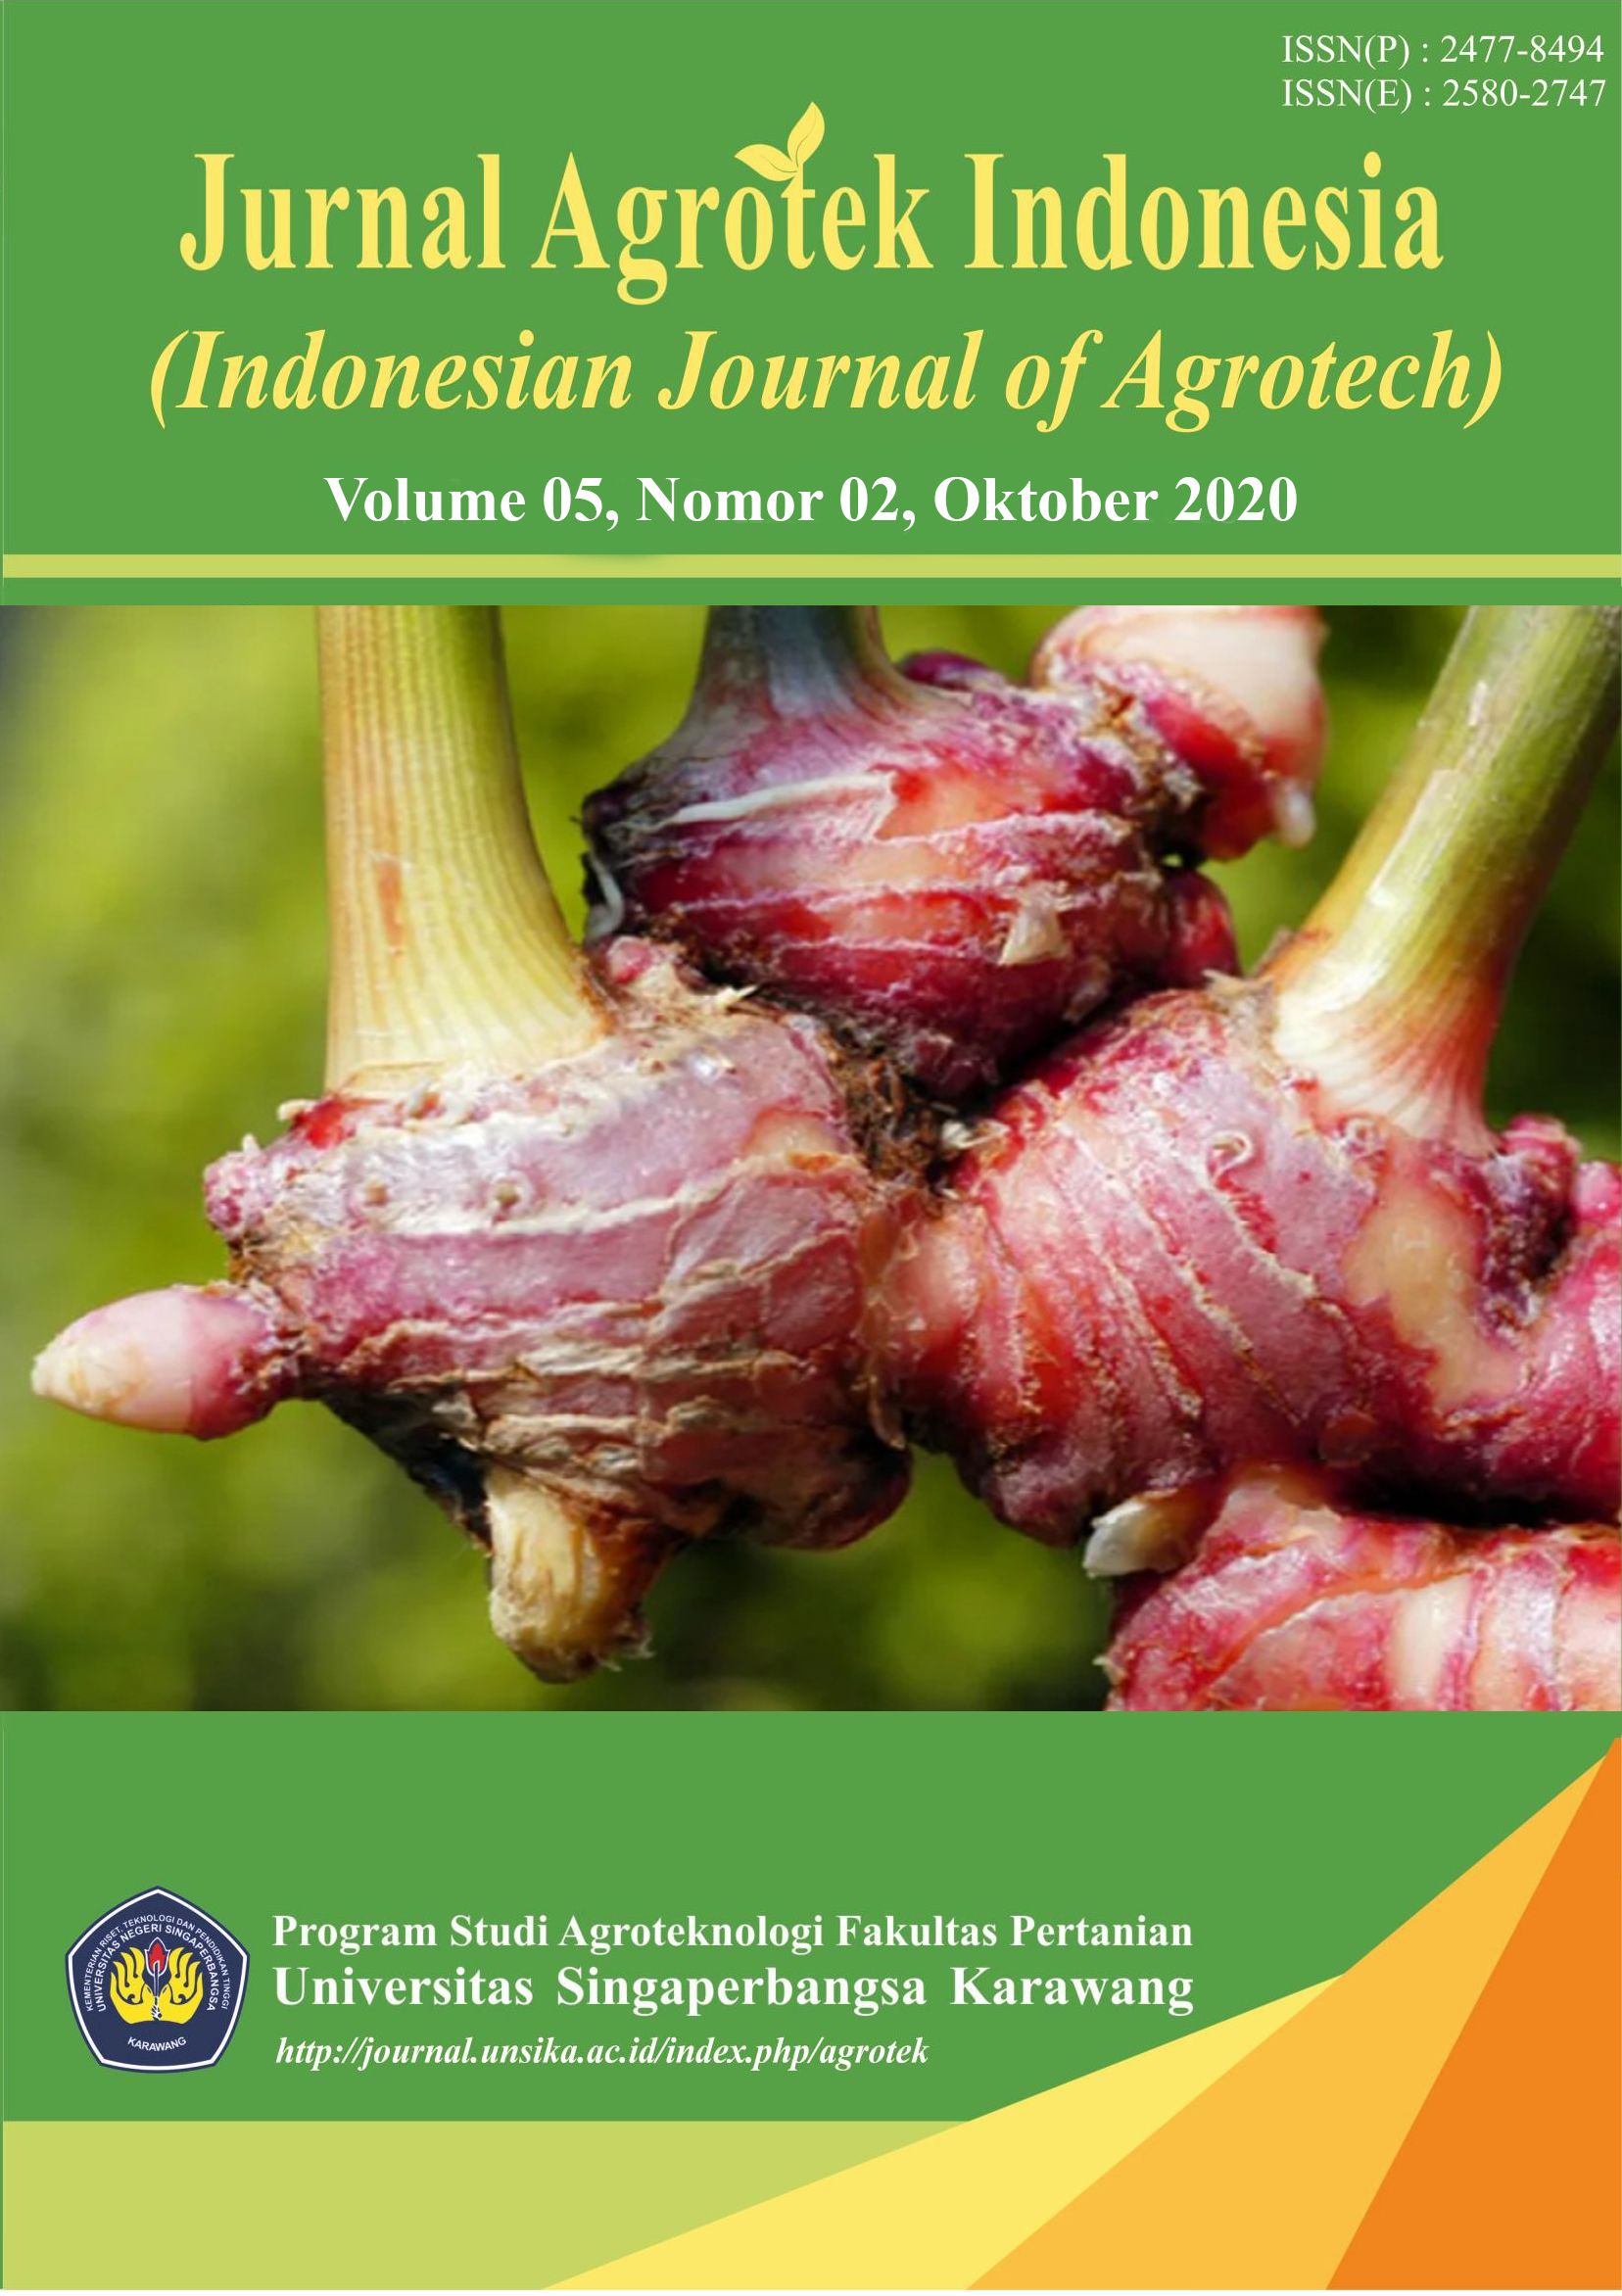 					View Vol. 5 No. 2 (2020): Jurnal Agrotek Indonesia (Indonesian Journal of Agrotech)
				